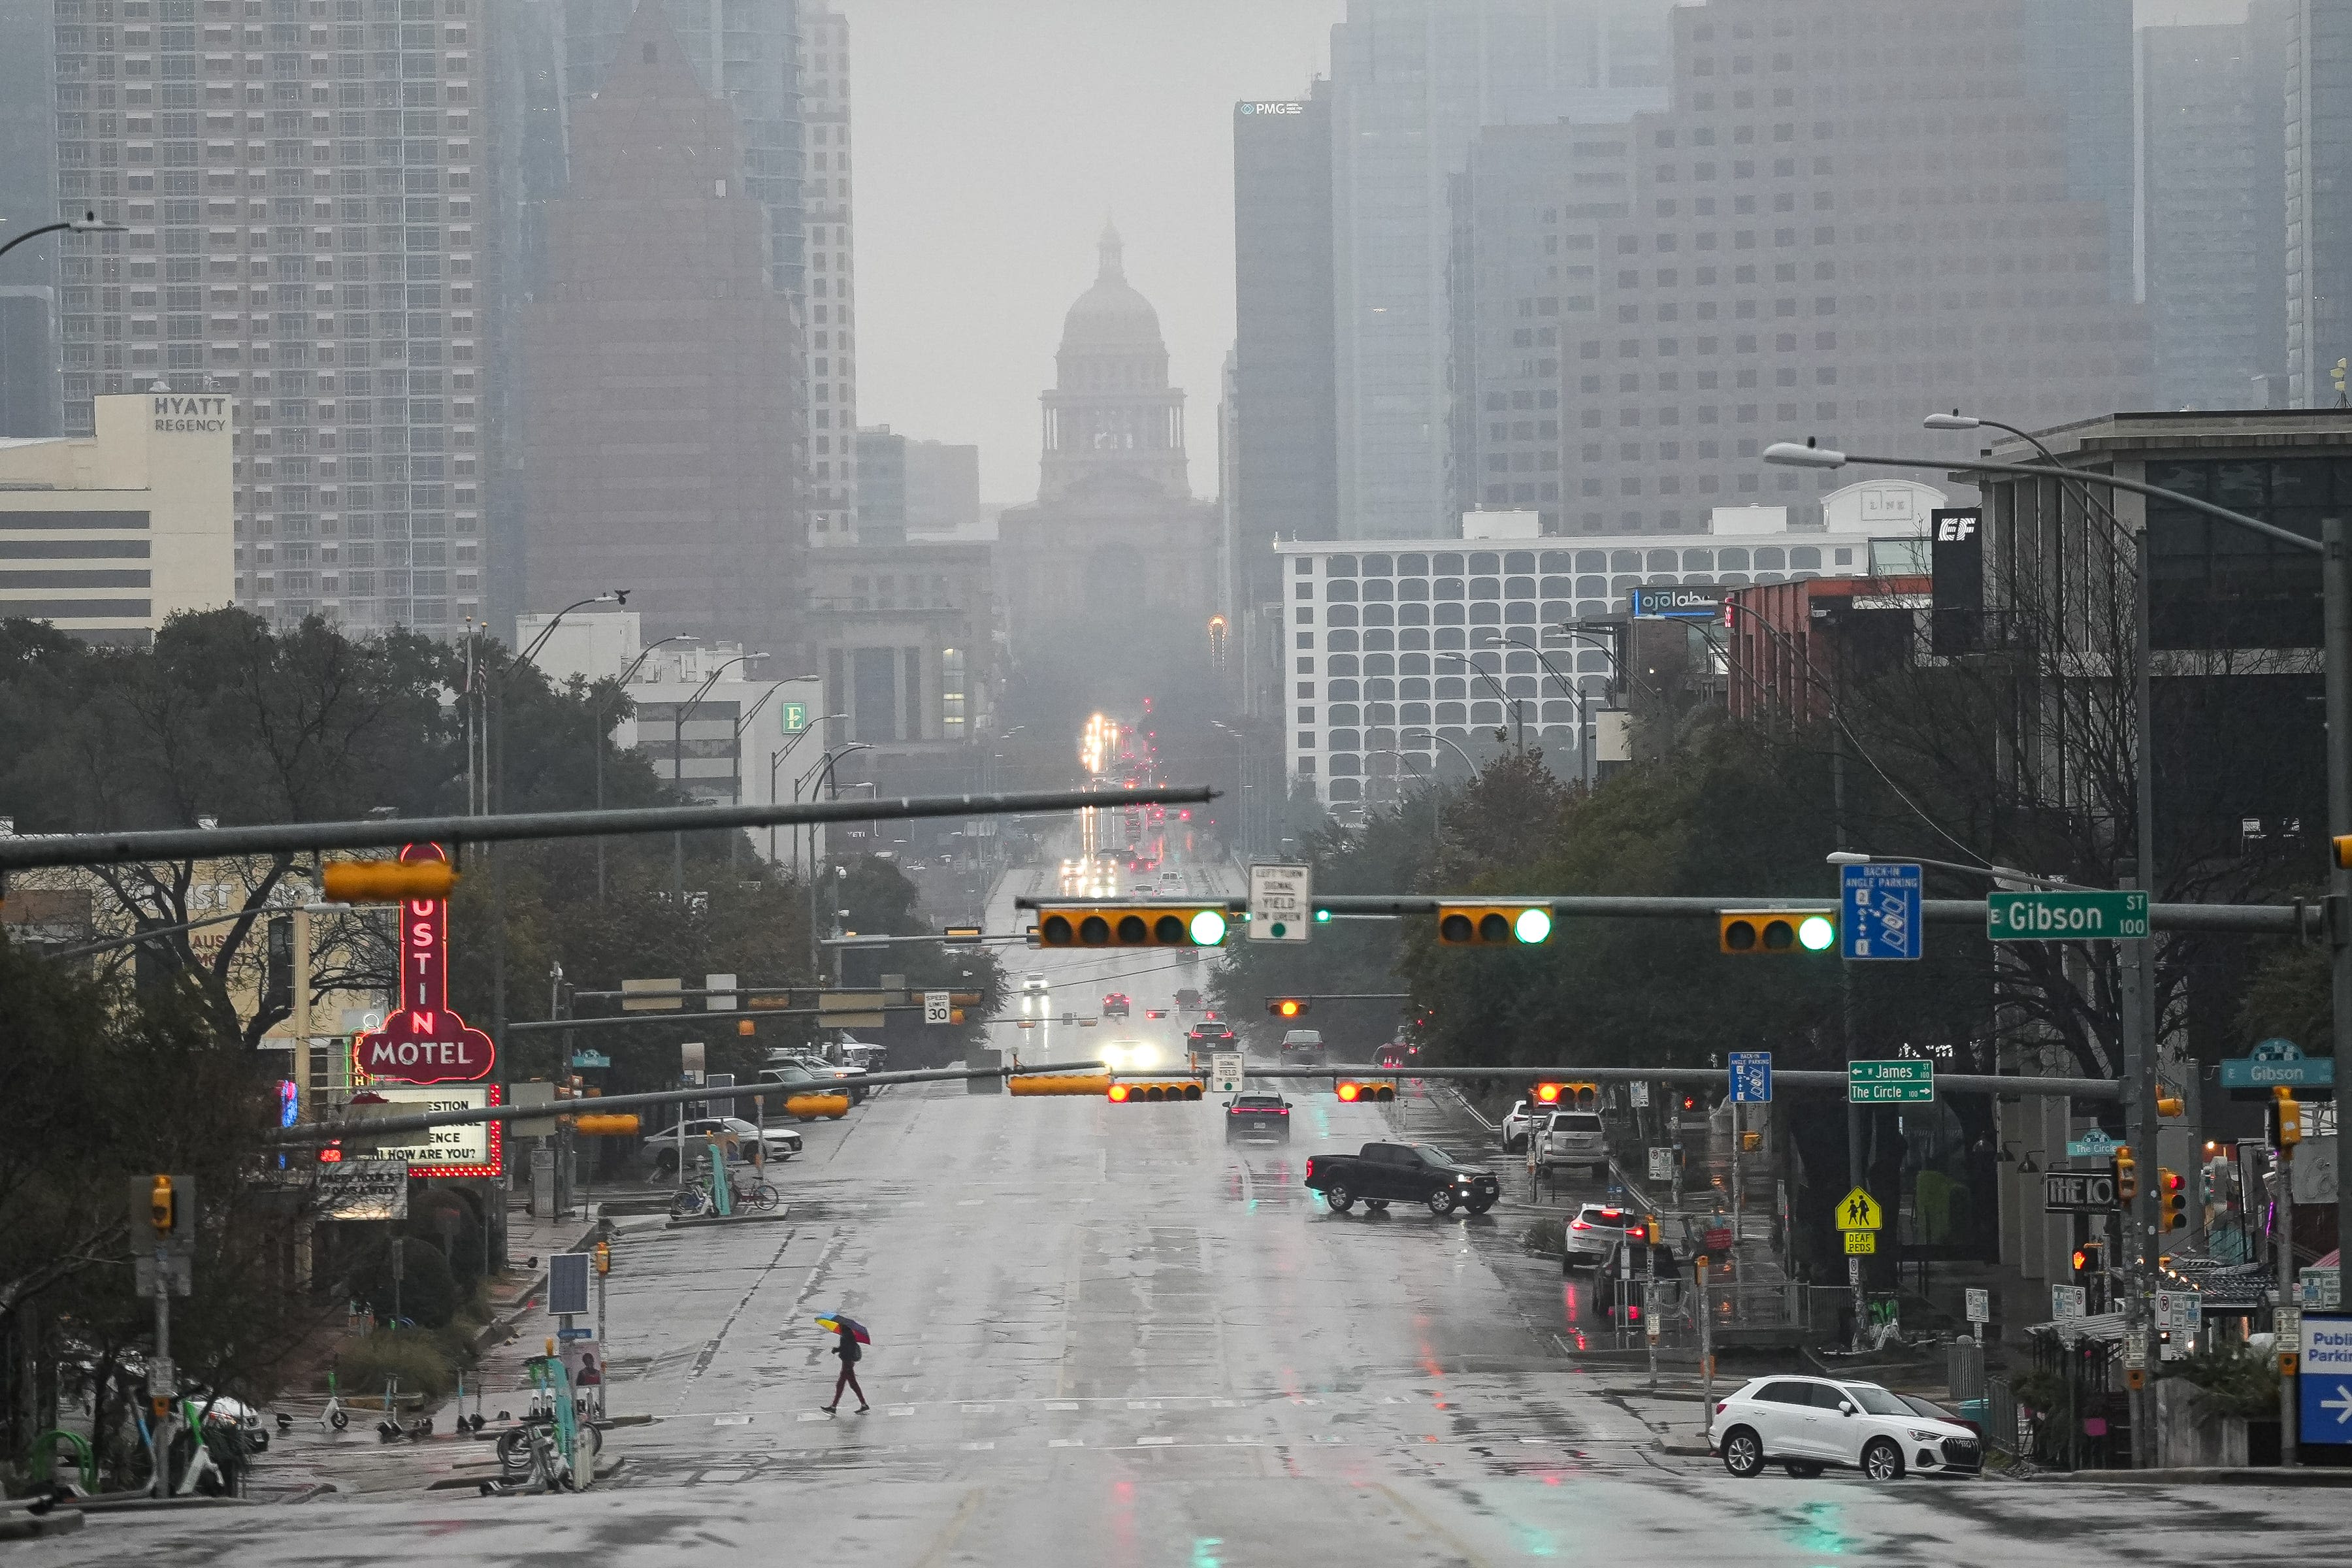 Severe storms predicted Monday and Wednesday in Austin area, NWS says